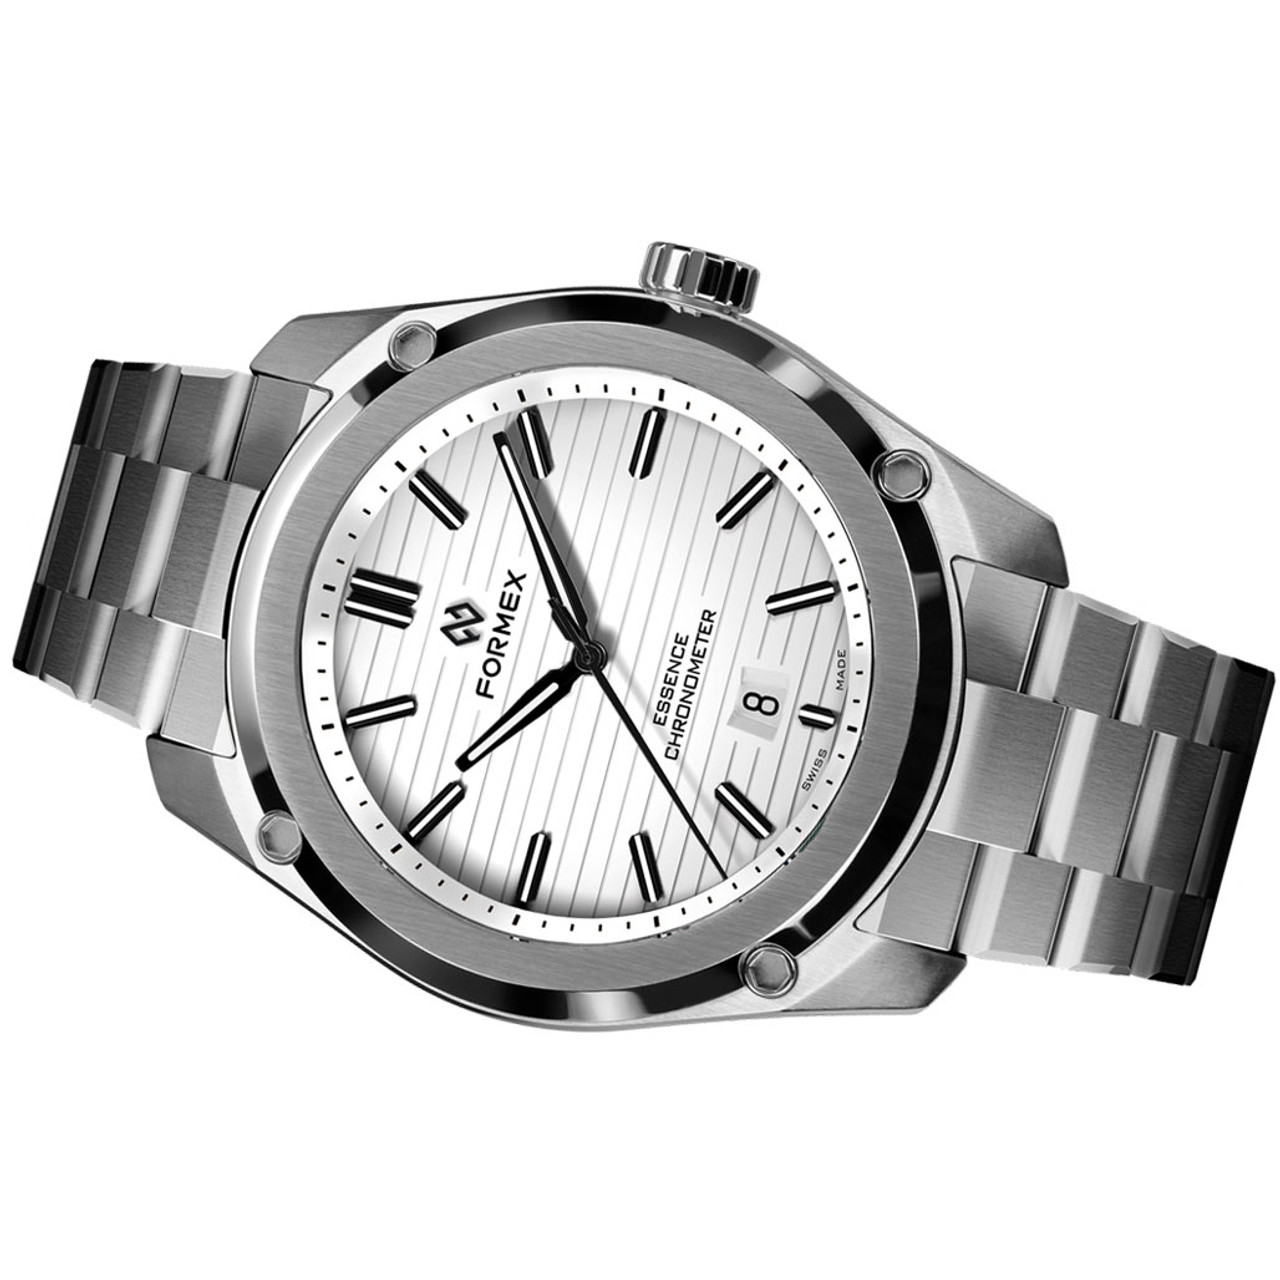 Formex Essence ThirtyNine Swiss Automatic Chronometer with White Dial  #0333-1-6611-100